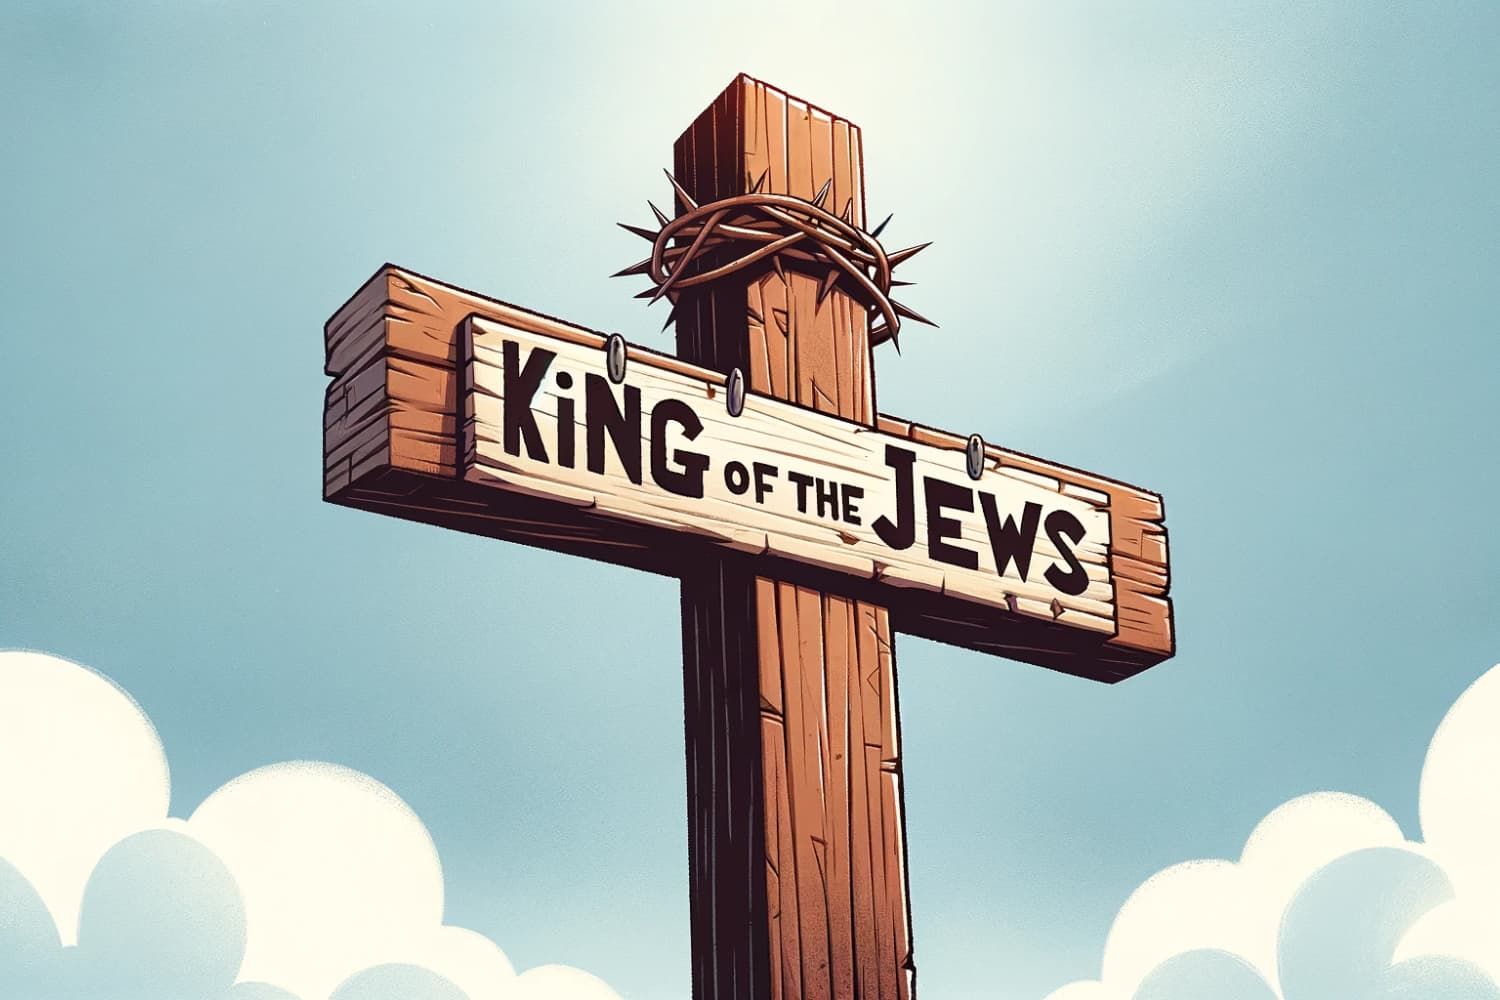 Lesson%20-%20NT%20Easter%2006%20-%20Jesus%20king%20of%20the%20Jews-1a7fec3c Jesus (of Nazareth)